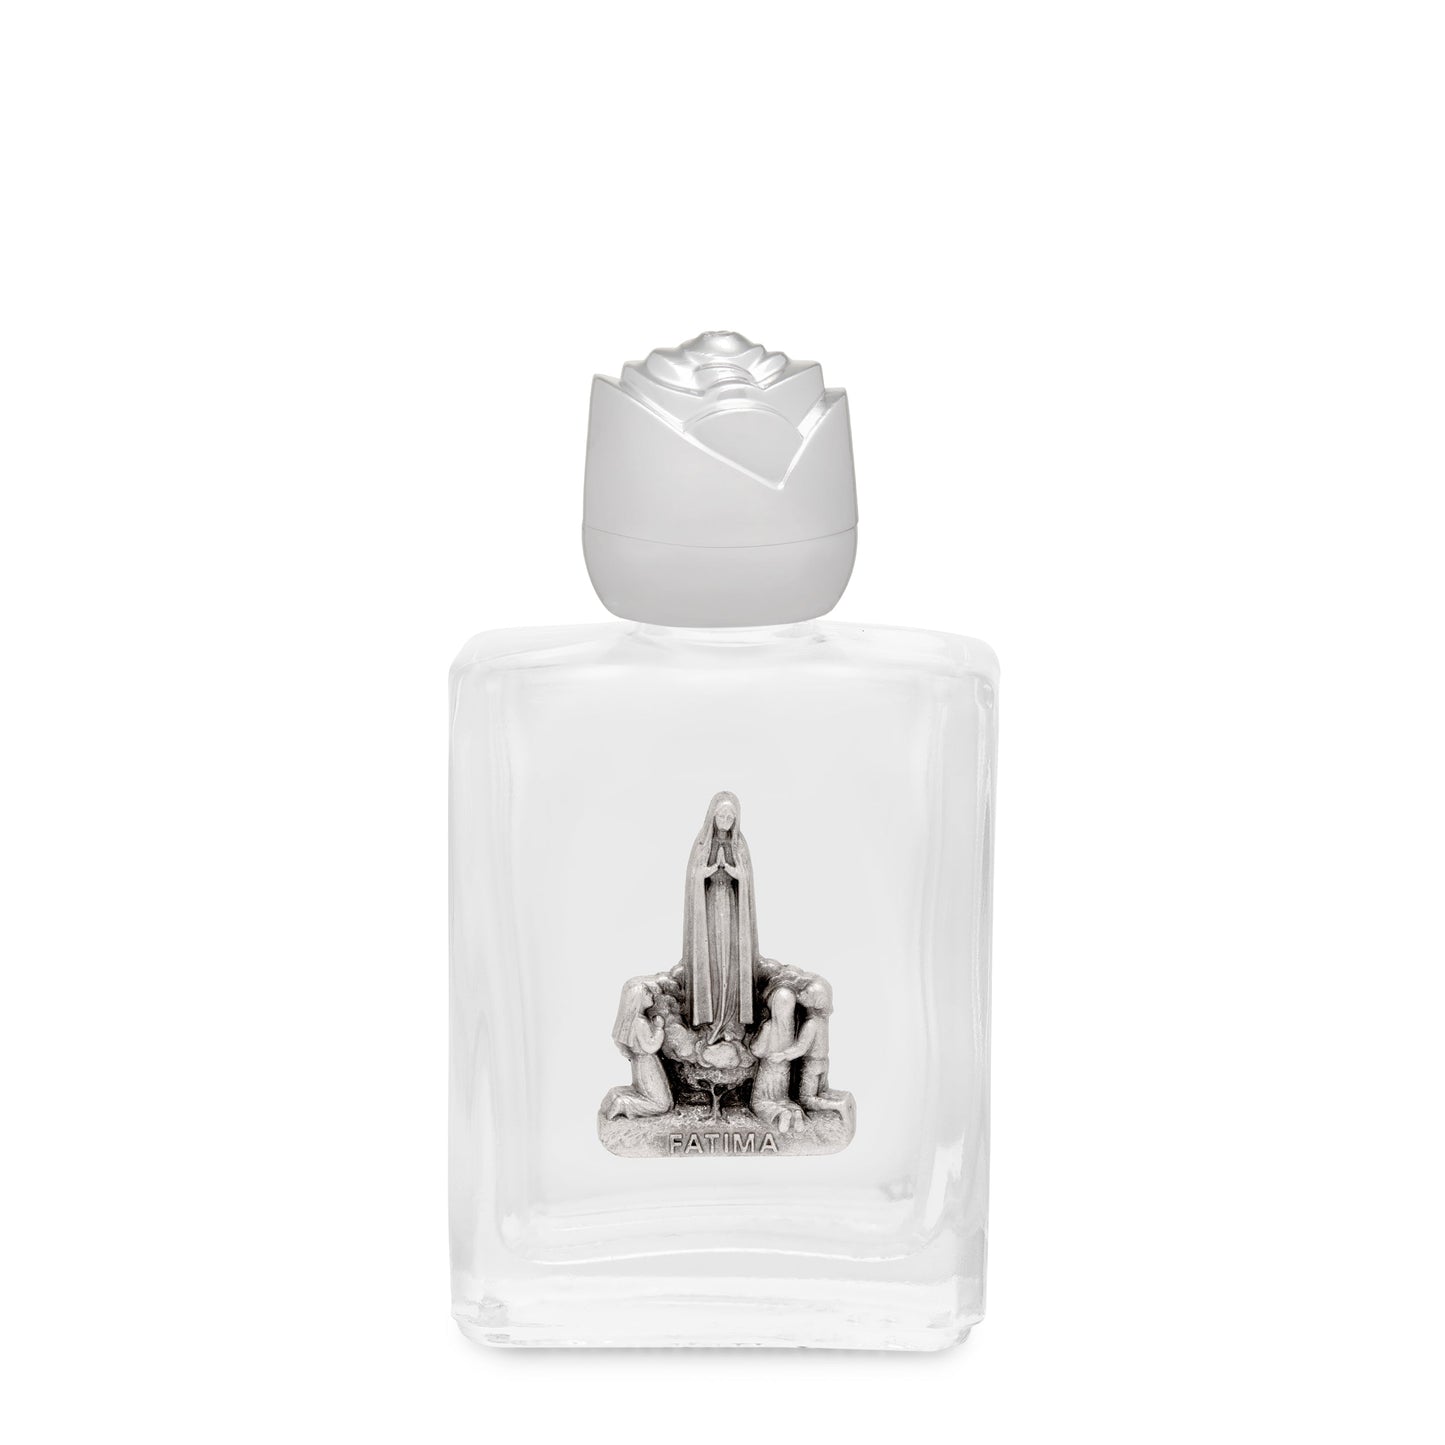 MONDO CATTOLICO Bottle of 10 ml with Our Lady of Fatima